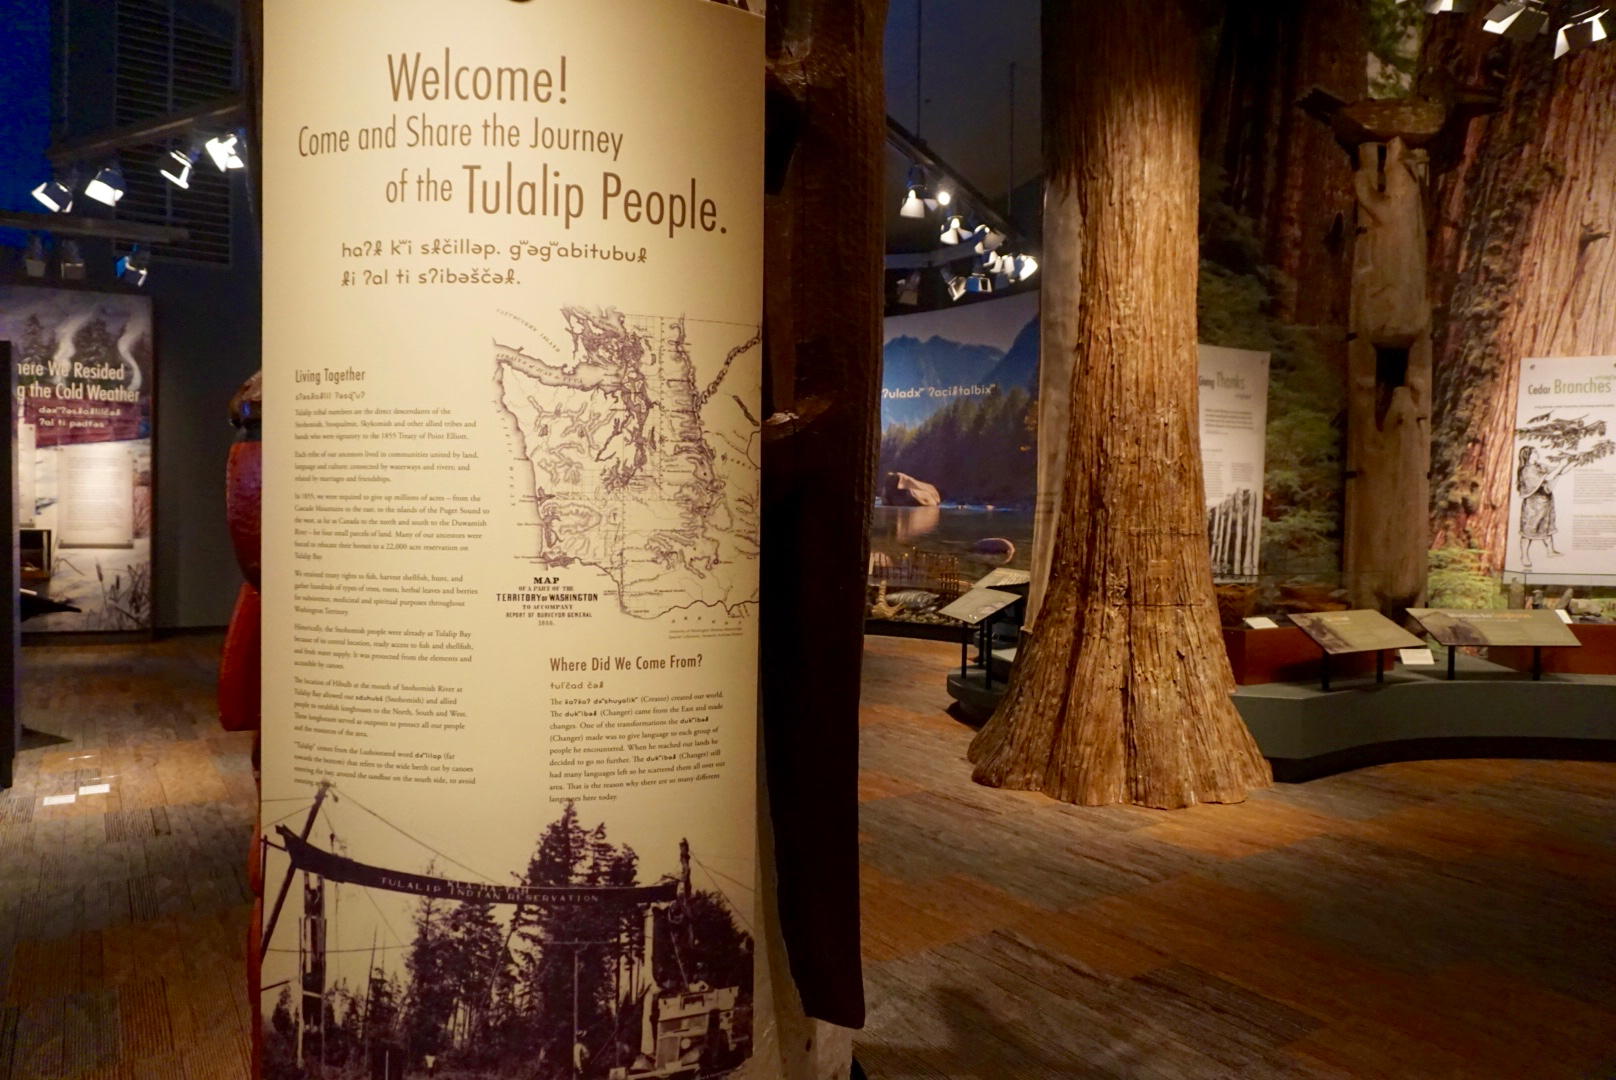 In the main exhibit area, you can learn about the natural resources the Tulalip tribes used and harvested for food, clothing, shelter, and everything in between.